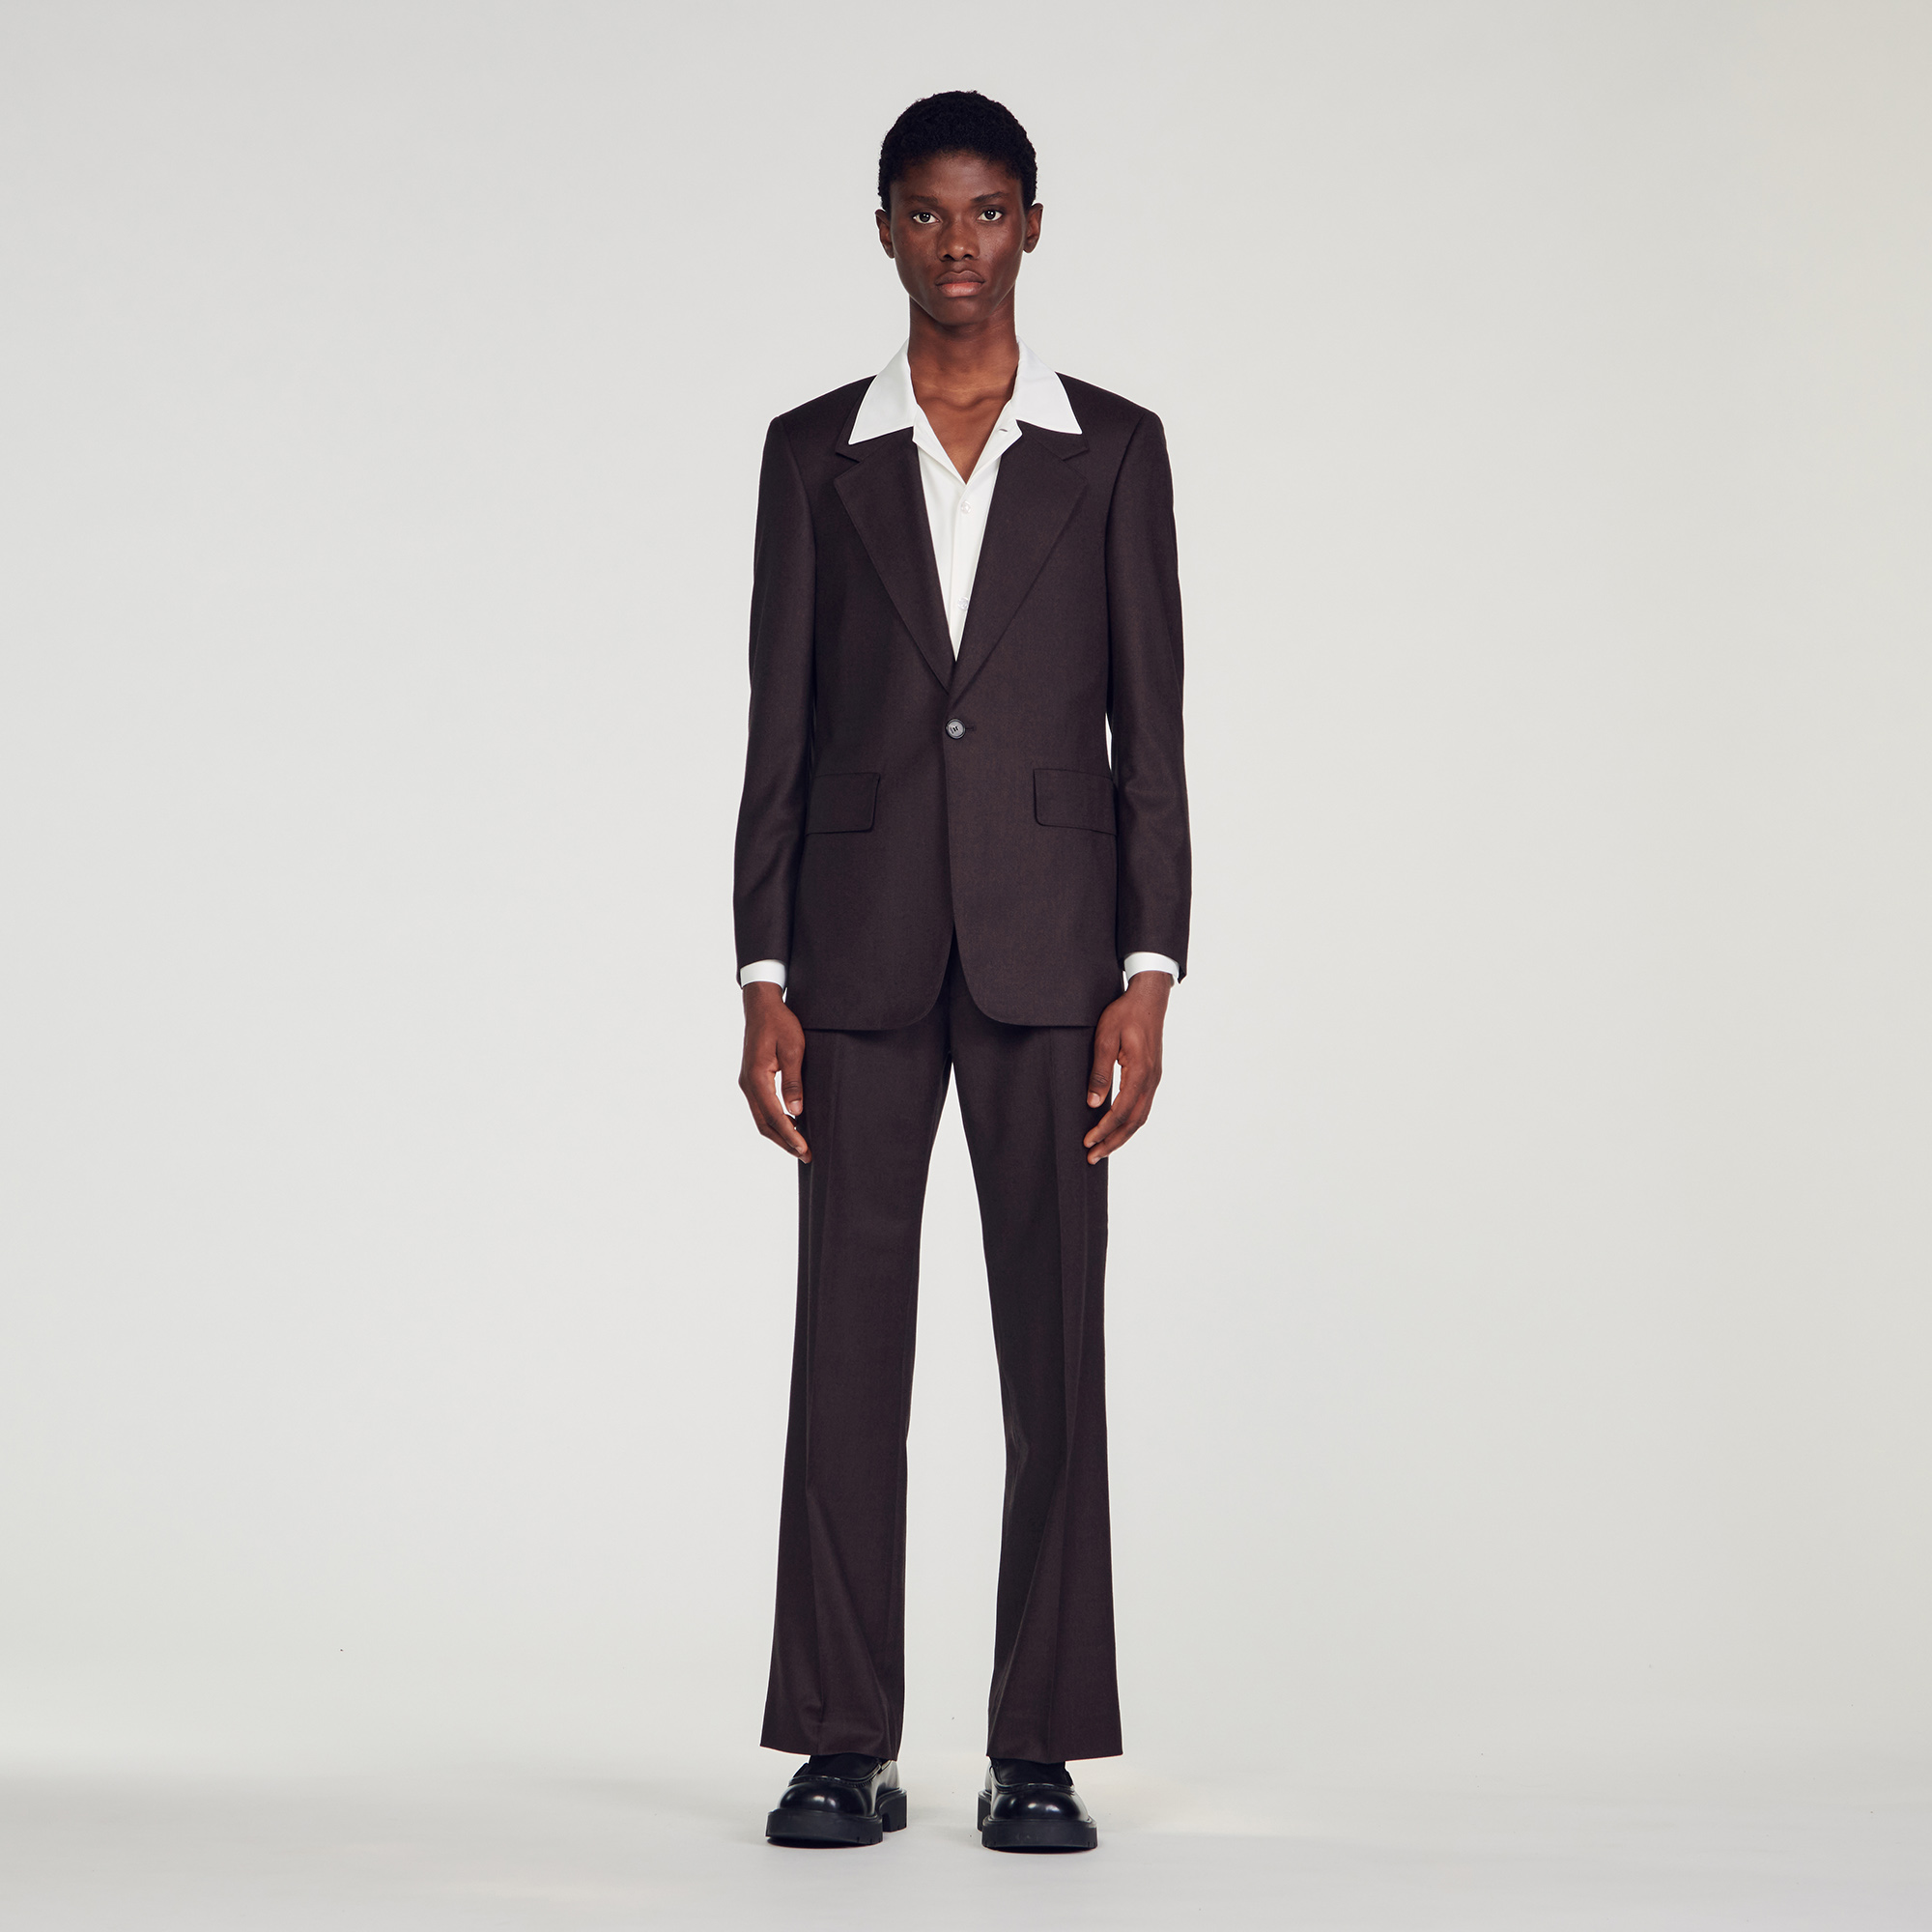 Sandro virgin wool Body lining: Oversized suit jacket featuring a wide collar, long sleeves, a two-button fastening and flap pockets